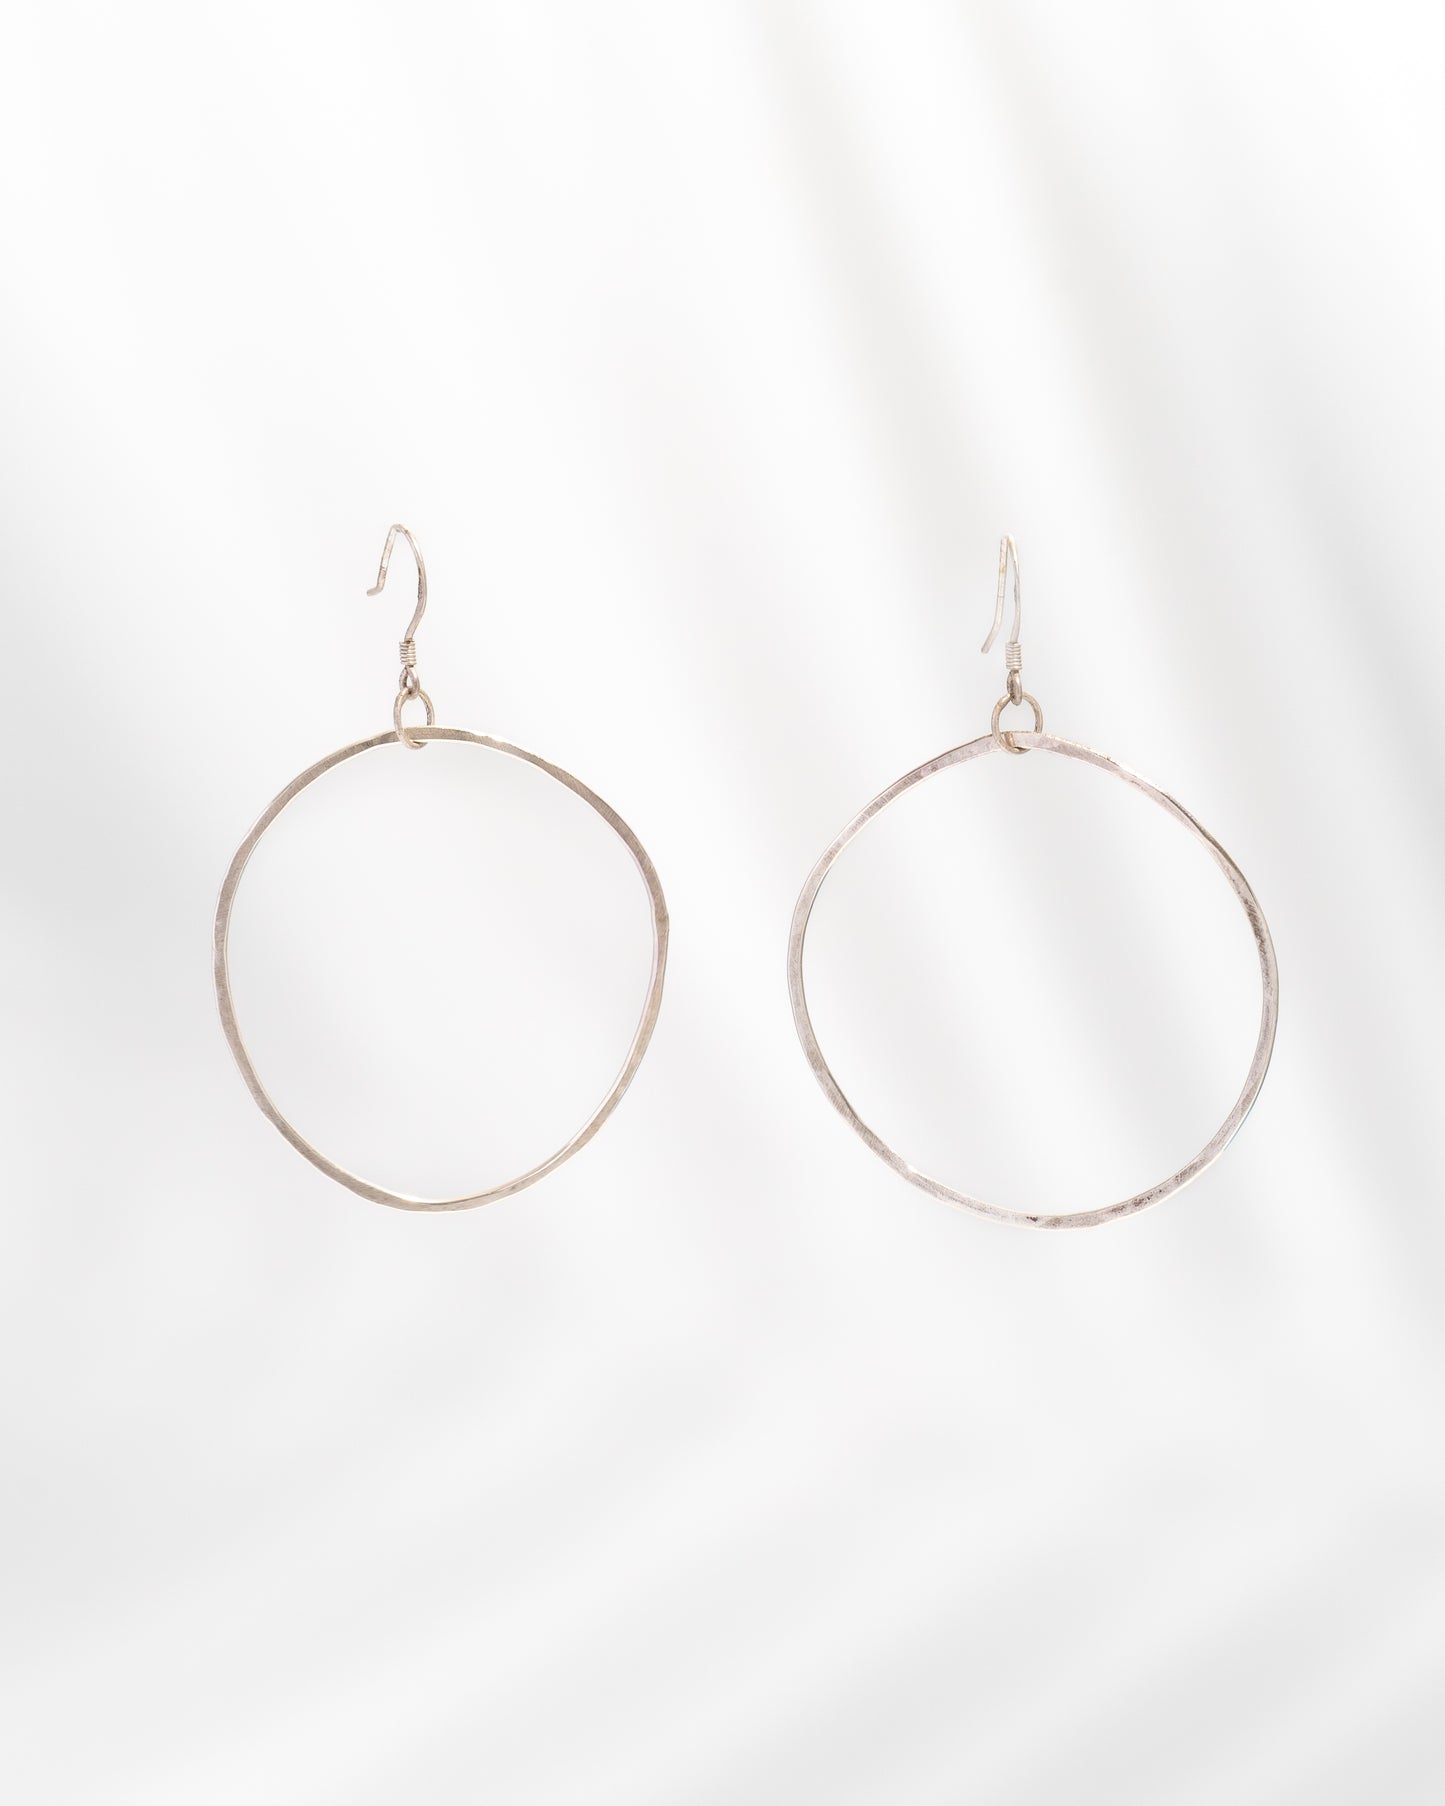 Sparkling Sterling Silver Organic Hoops (round)